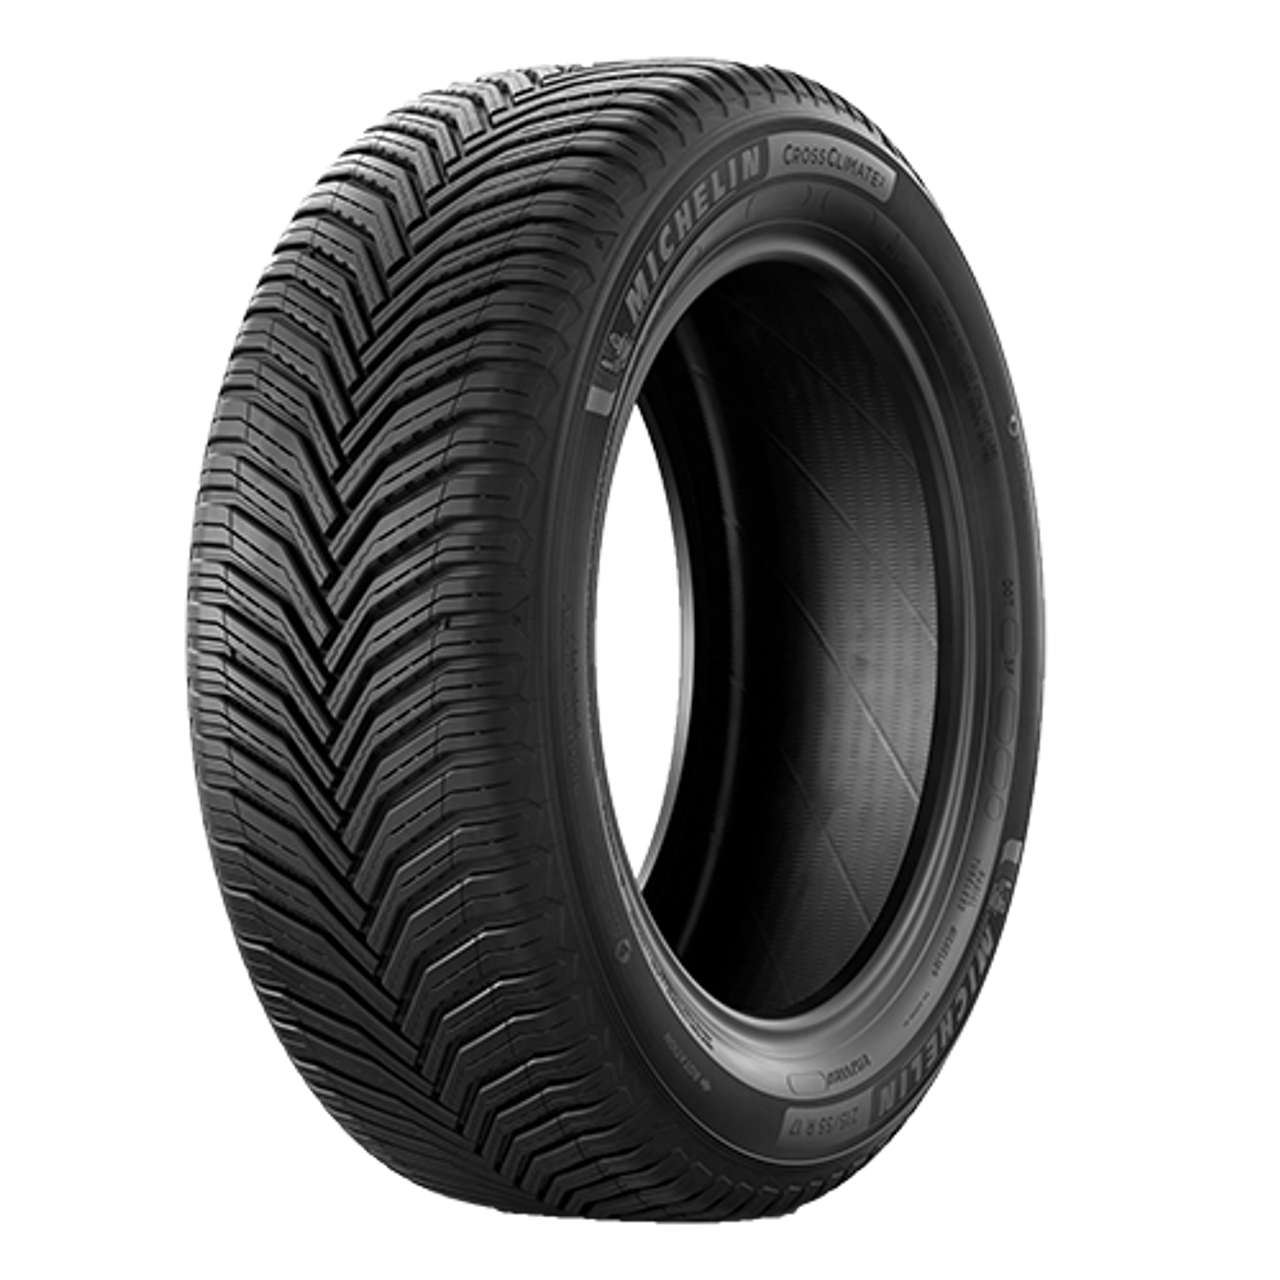 MICHELIN CROSSCLIMATE 2 215/55R18 99V BSW XL